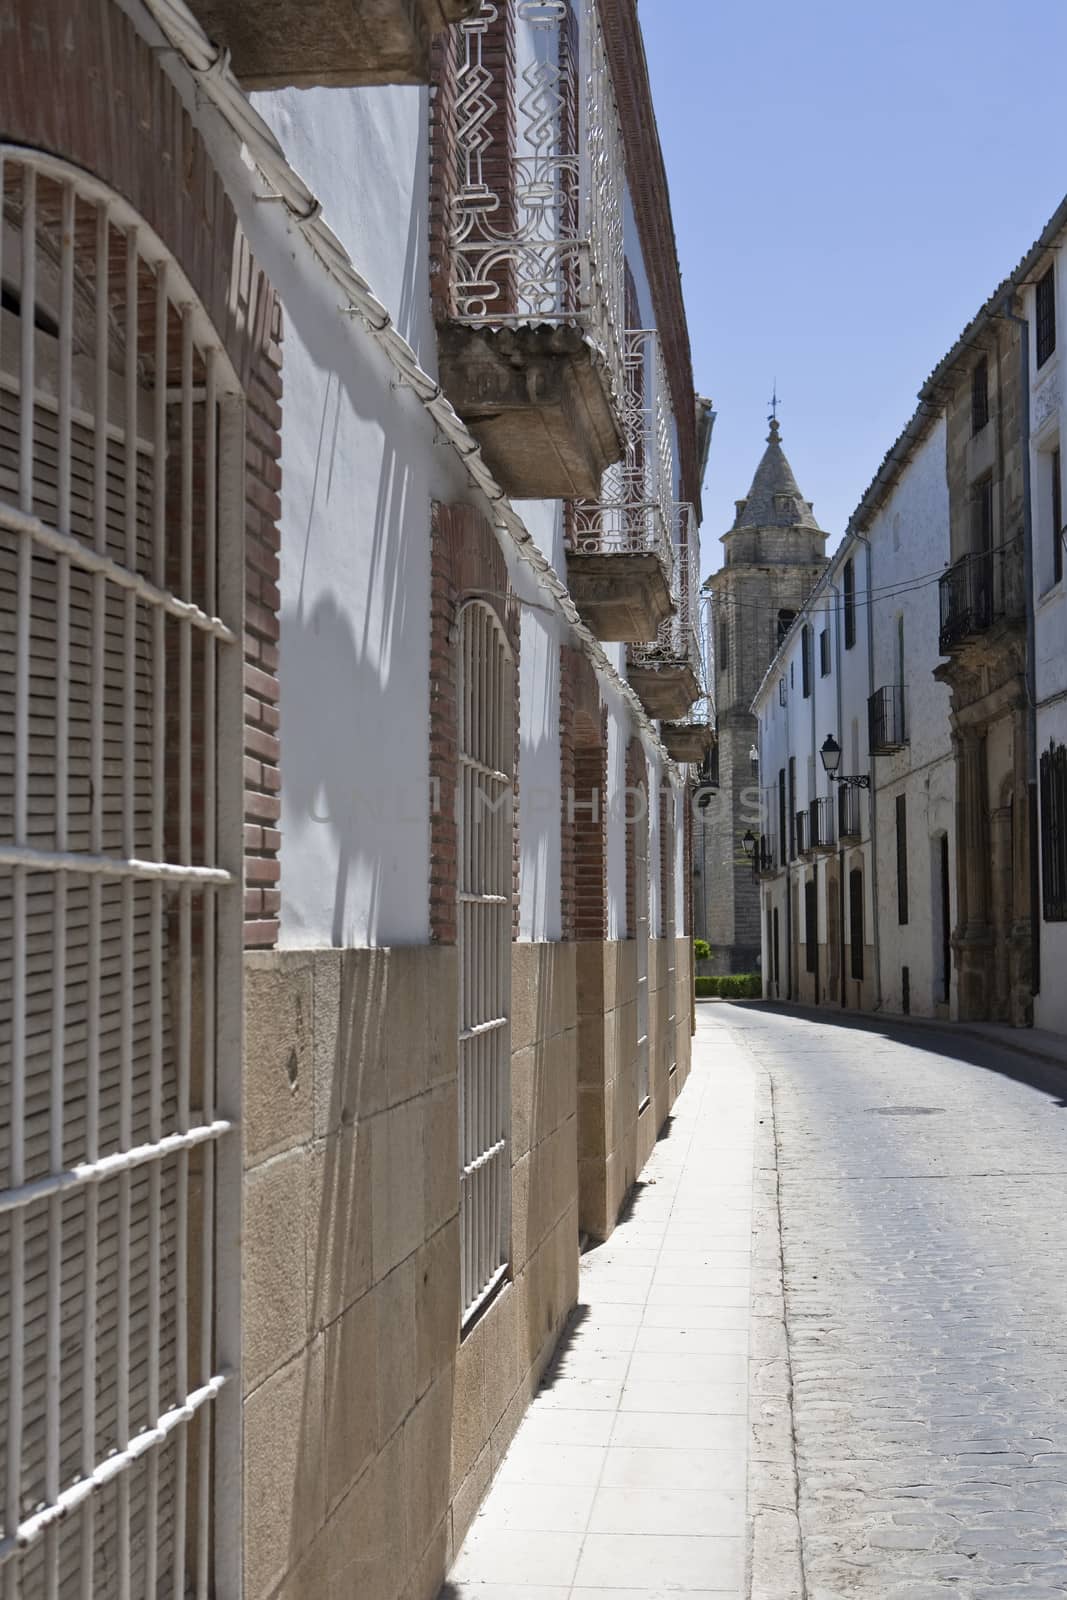 Mid afternoon in Street of Sabiote, Jaen province, Andalusia, Spain